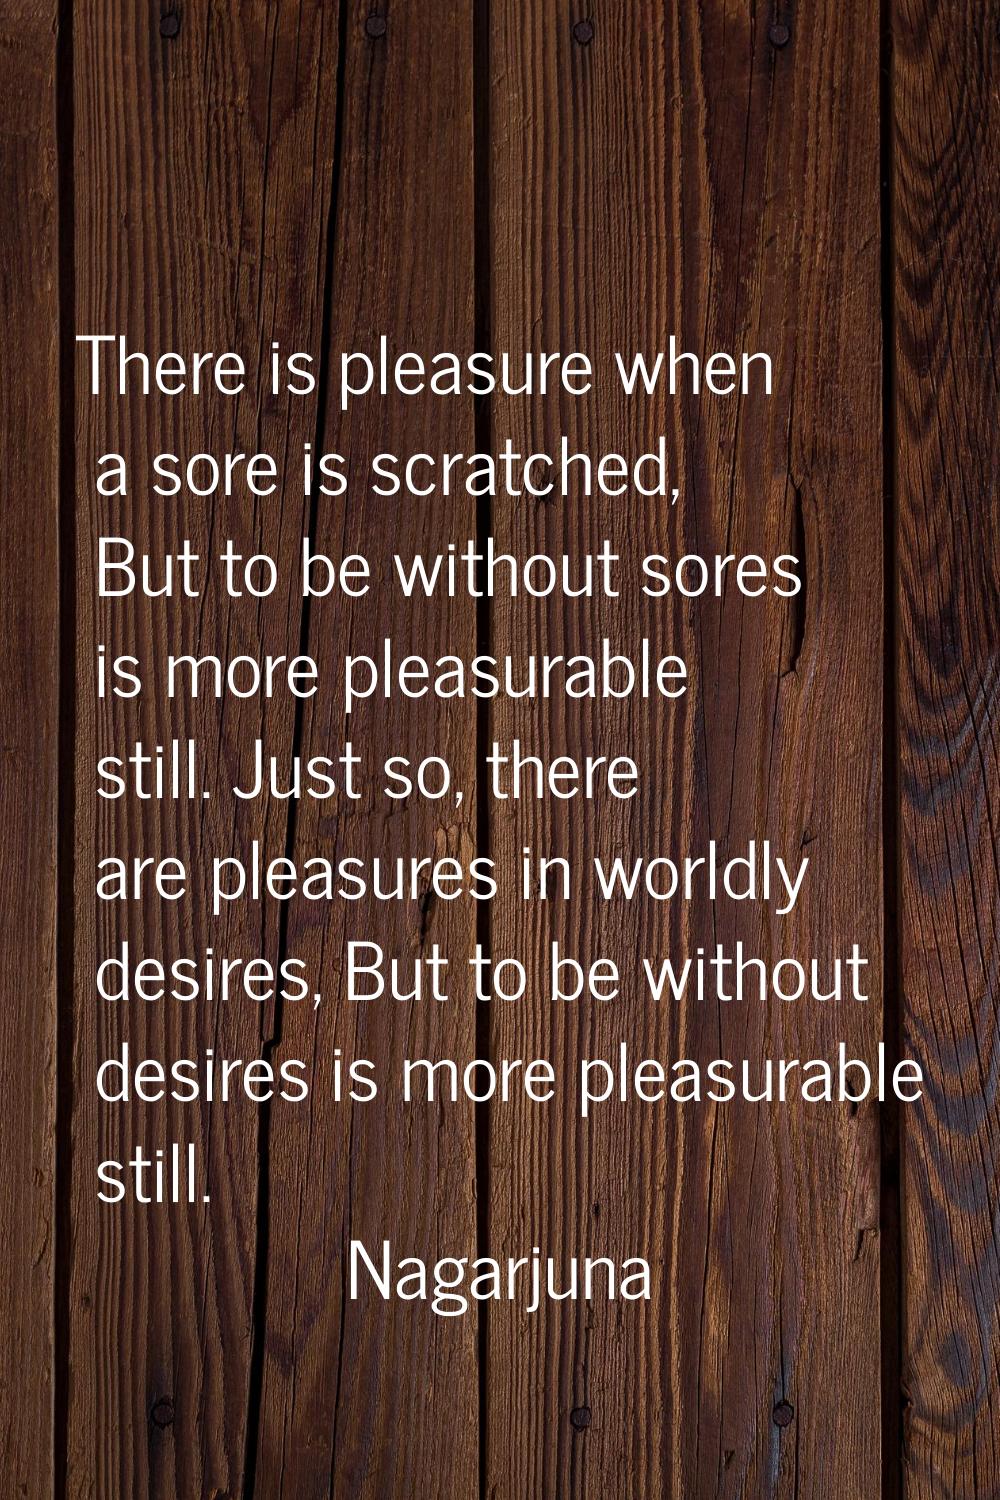 There is pleasure when a sore is scratched, But to be without sores is more pleasurable still. Just